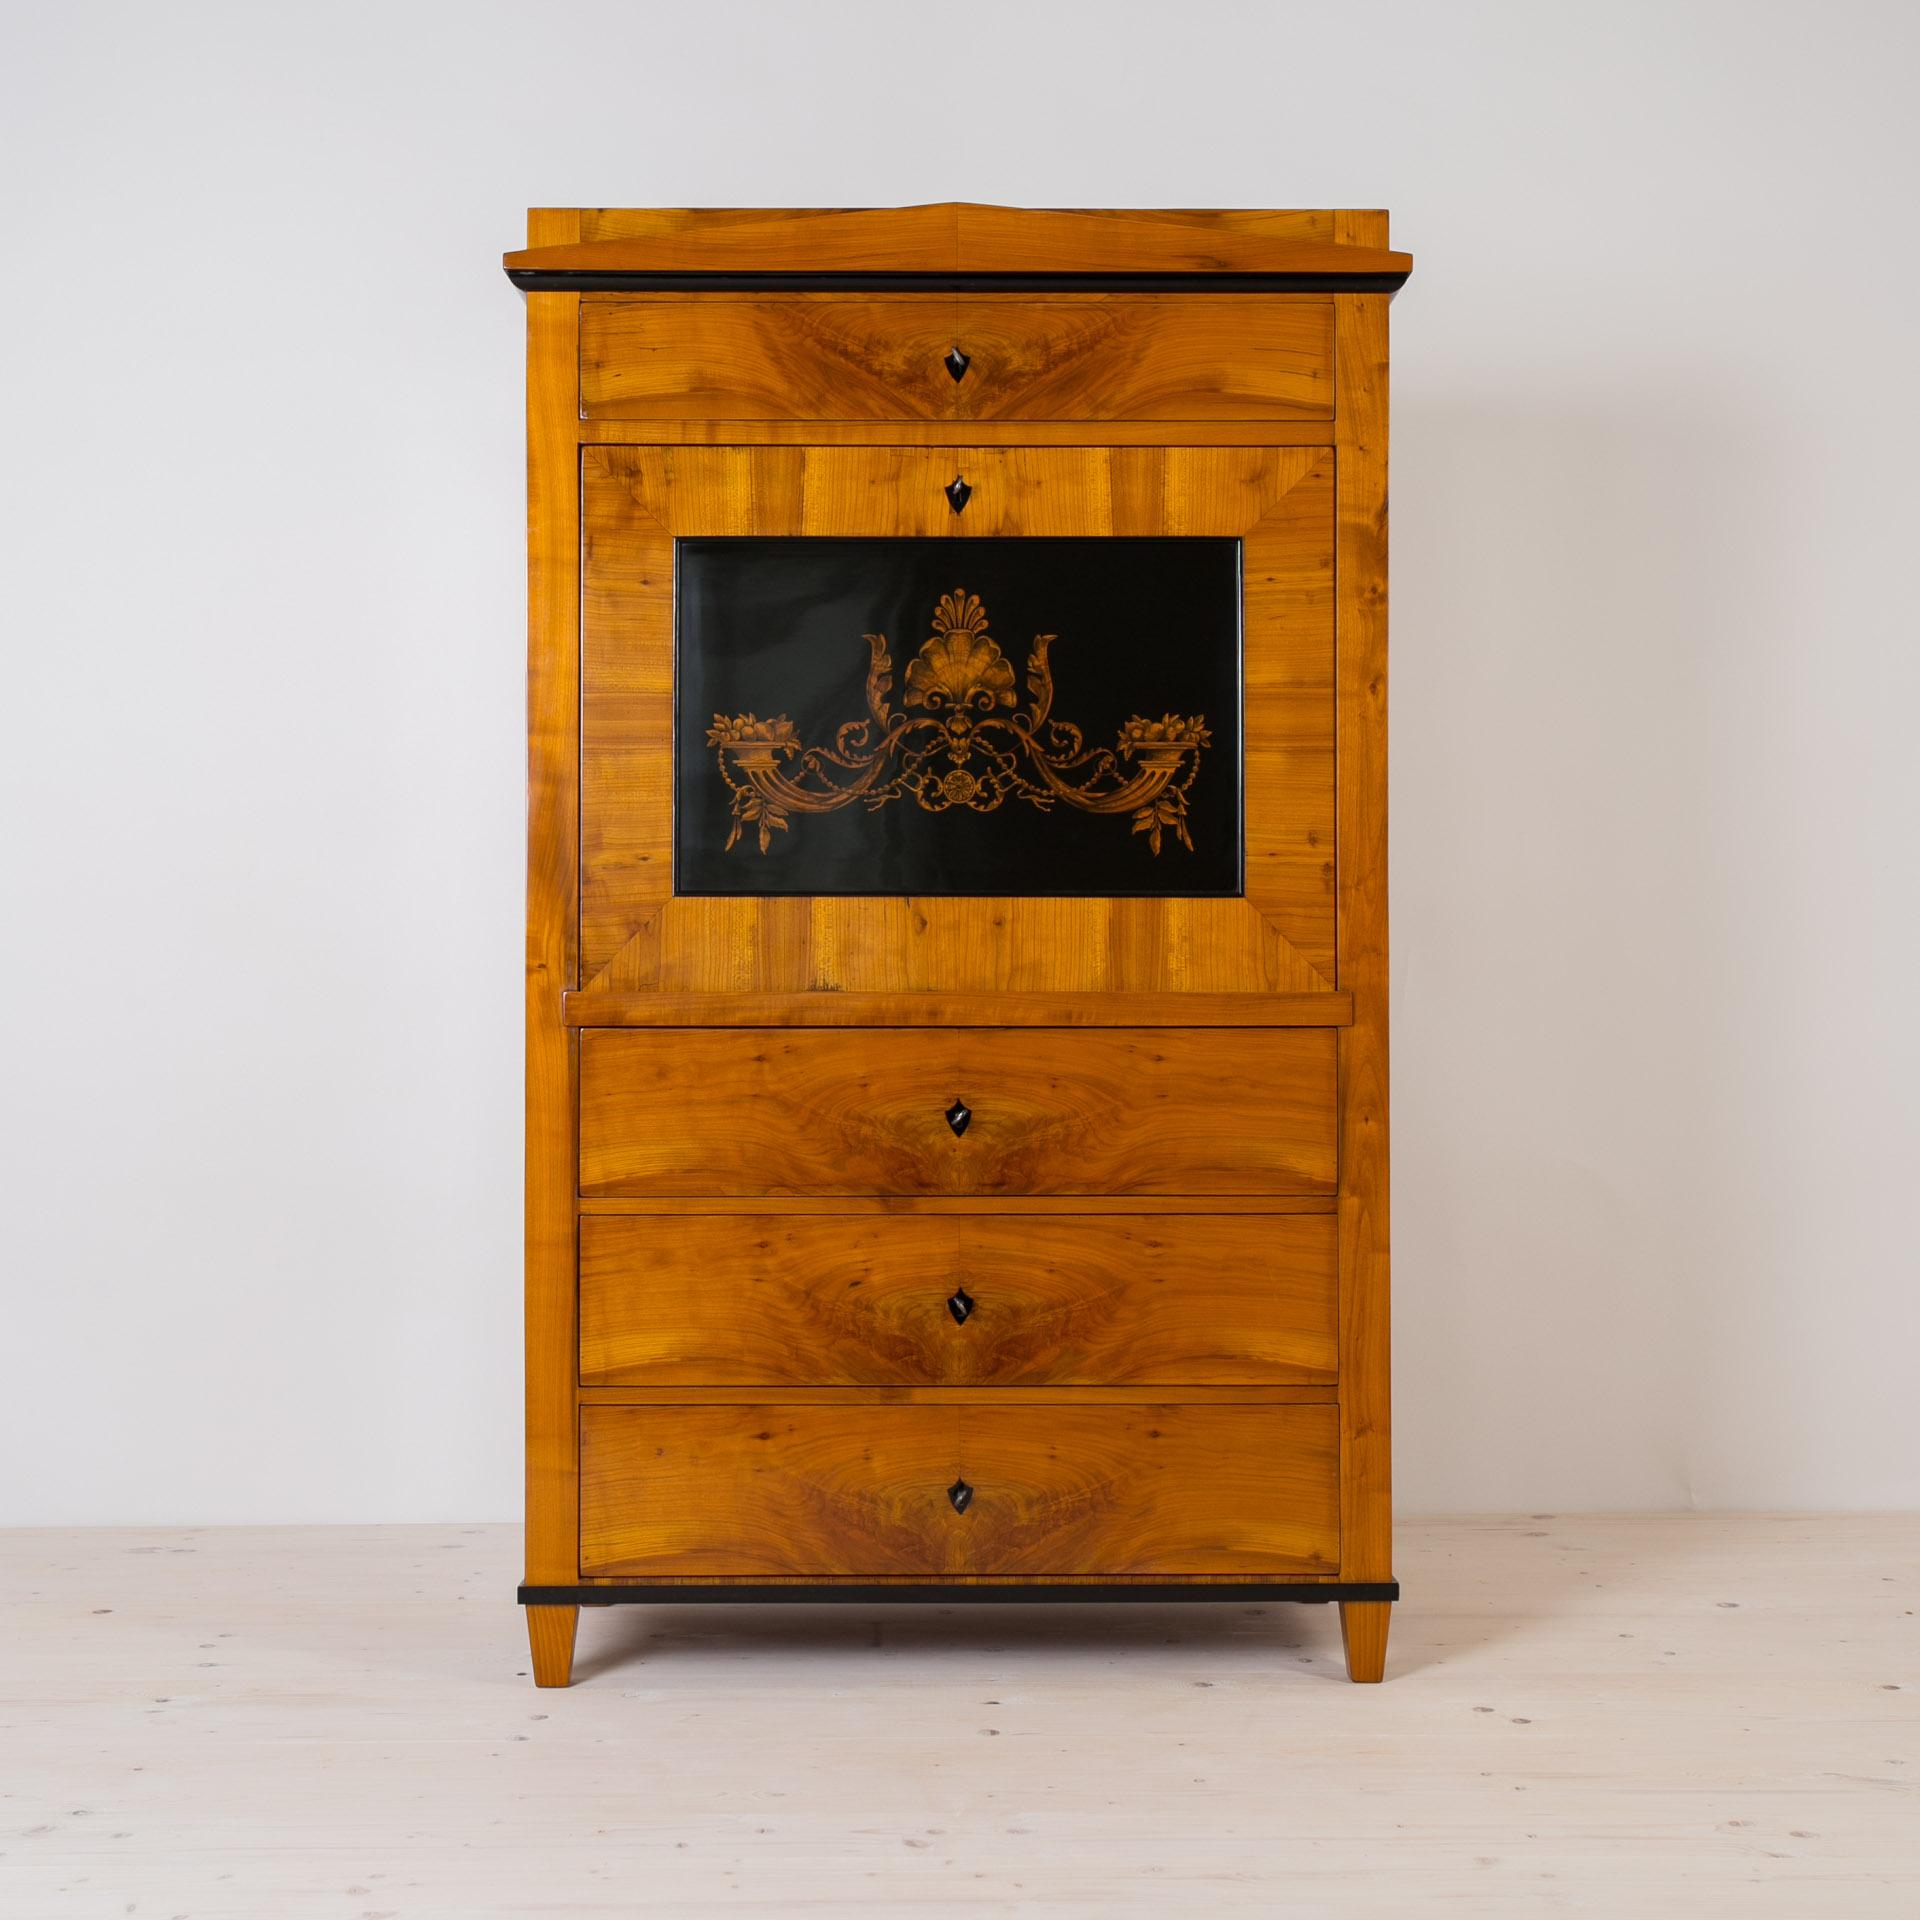 This beautiful Secretary comes from Germany and was made in 19th century. The piece is made of pine wood, veneered with cherry wood veneer. When opening the main section the doors transform into a writing desktop revealing a section with multiple